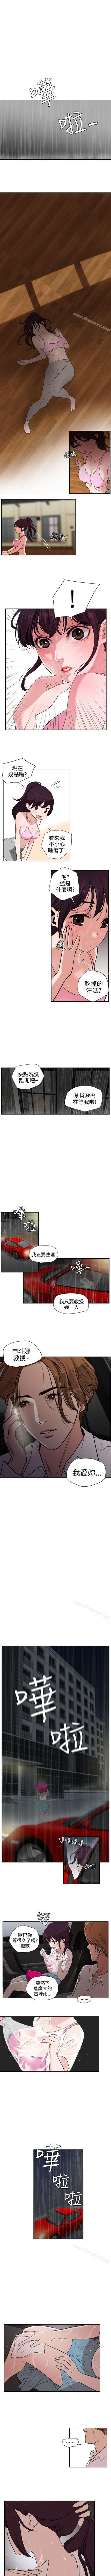 Solo Girl 欲求王 1-134 Bulge - Page 7